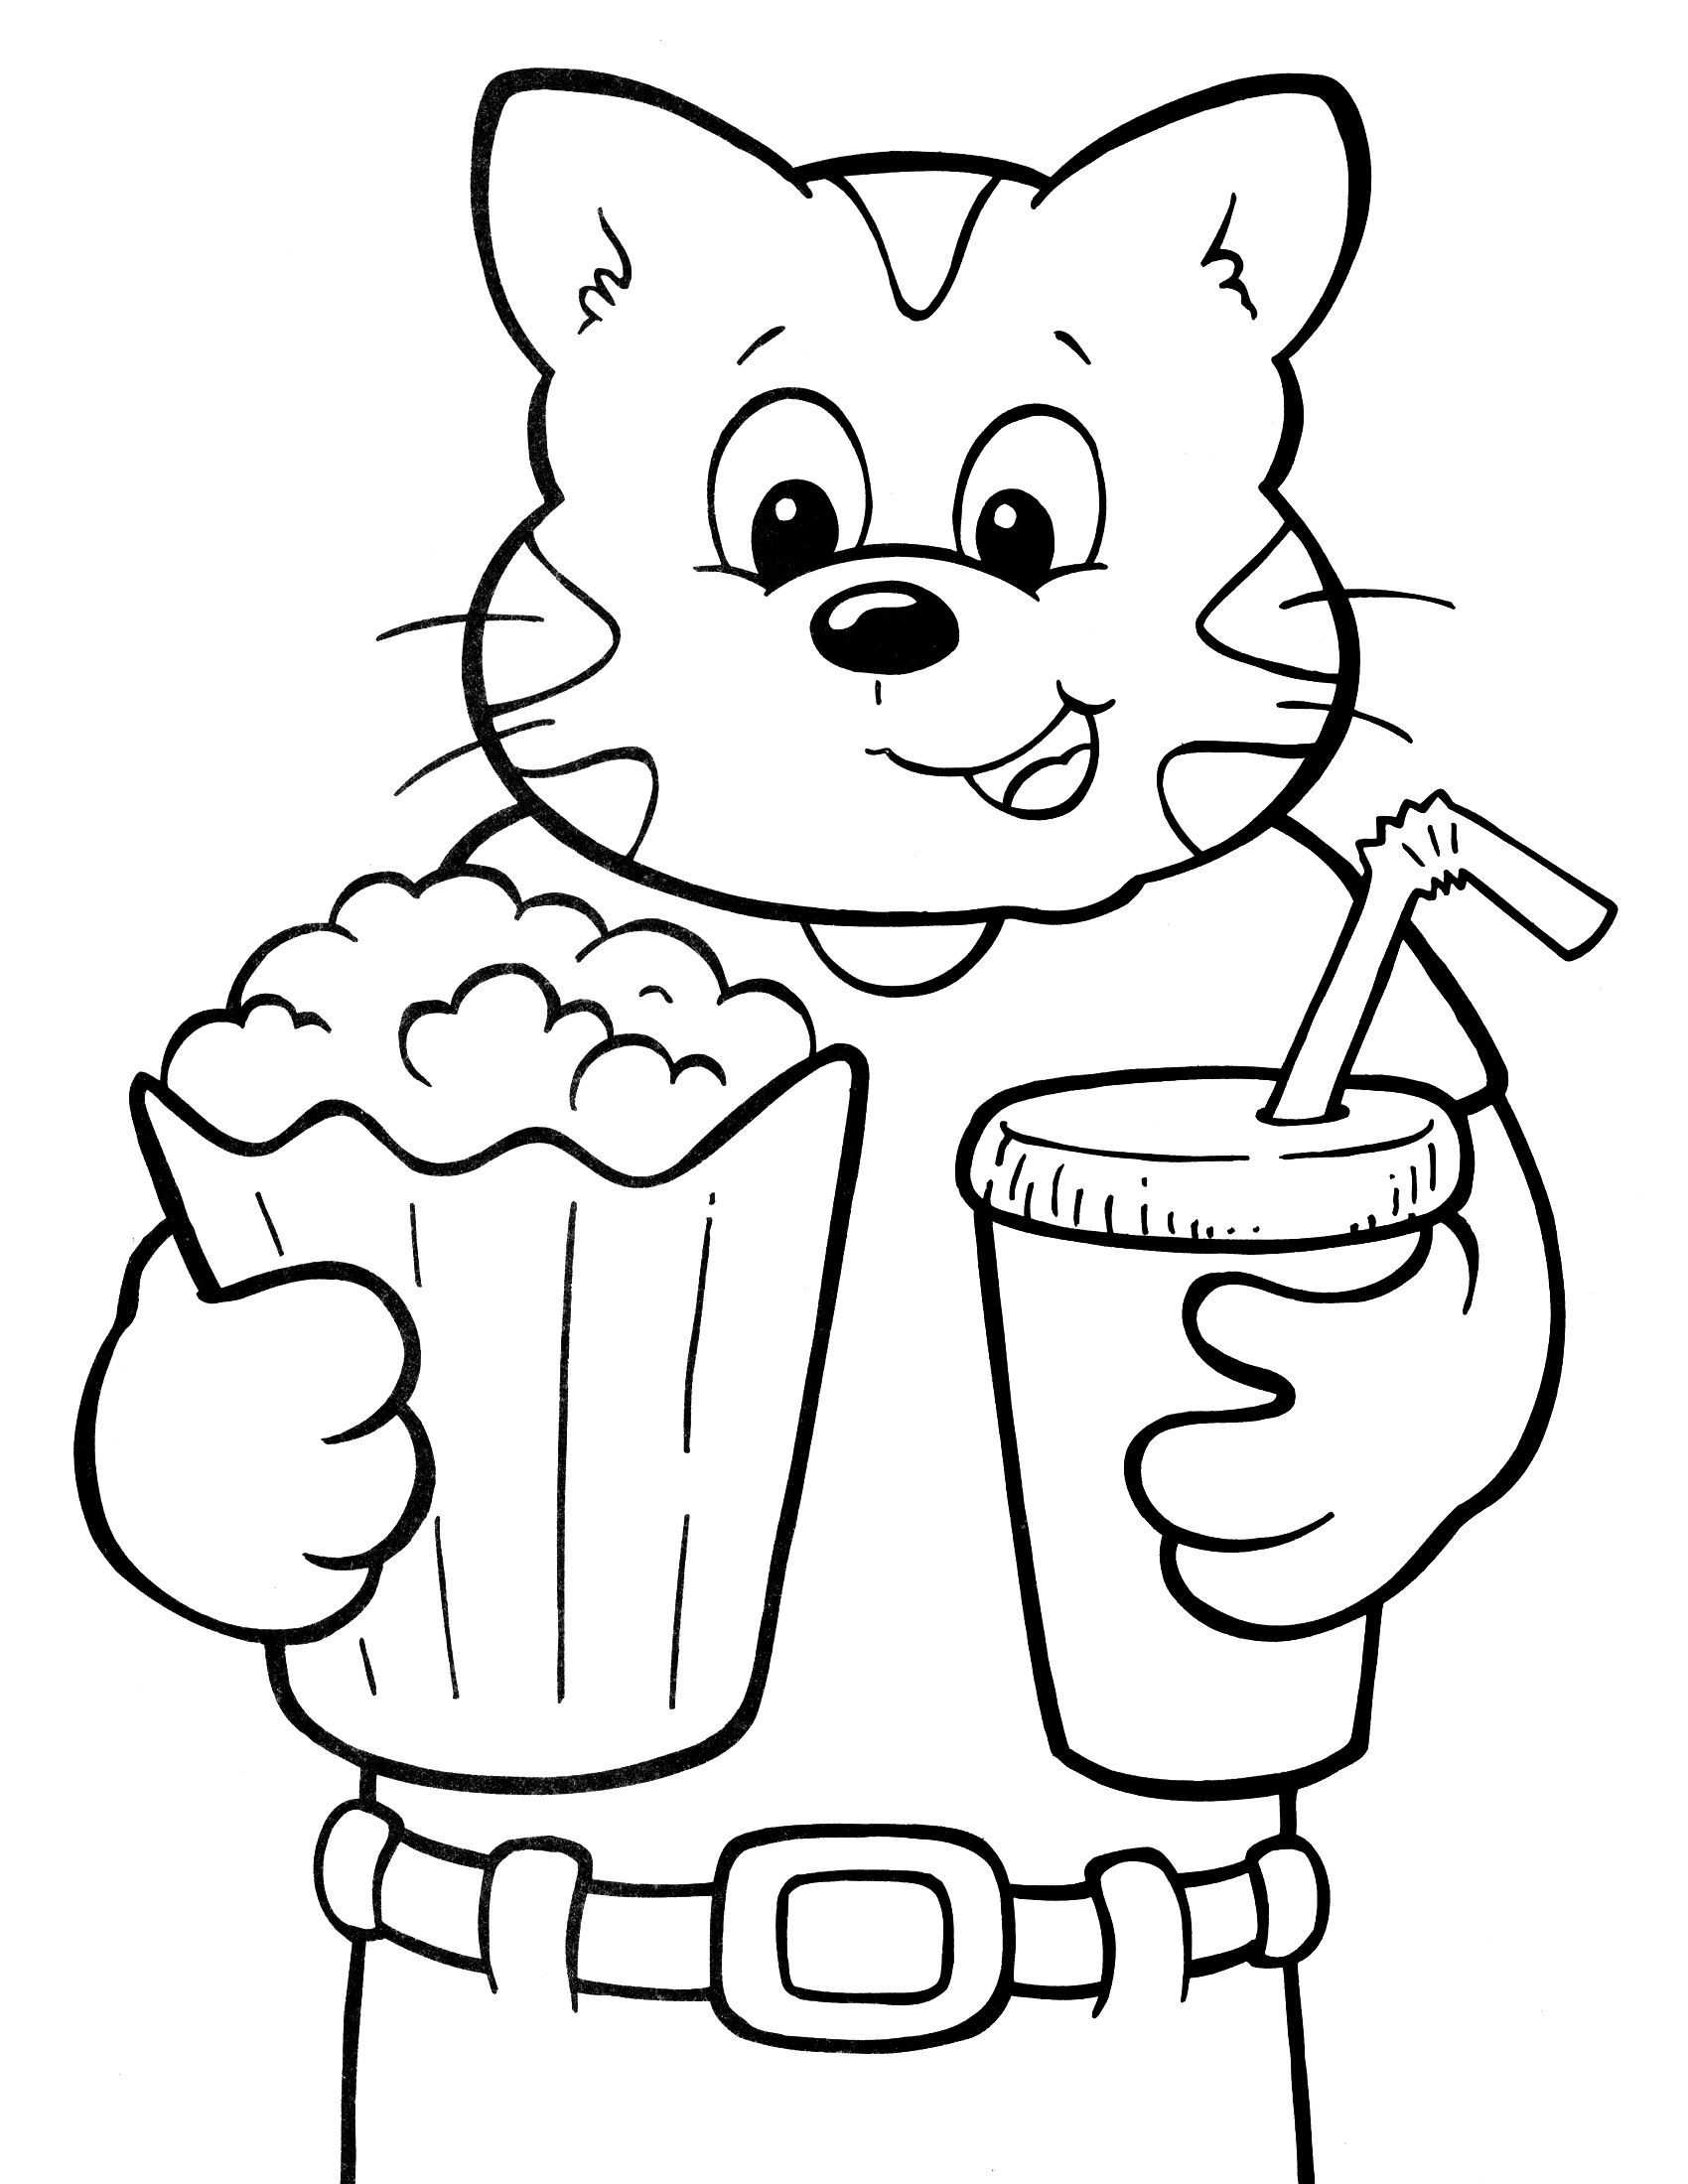 Personalized Happy Birthday Coloring Pages at GetColorings com Free